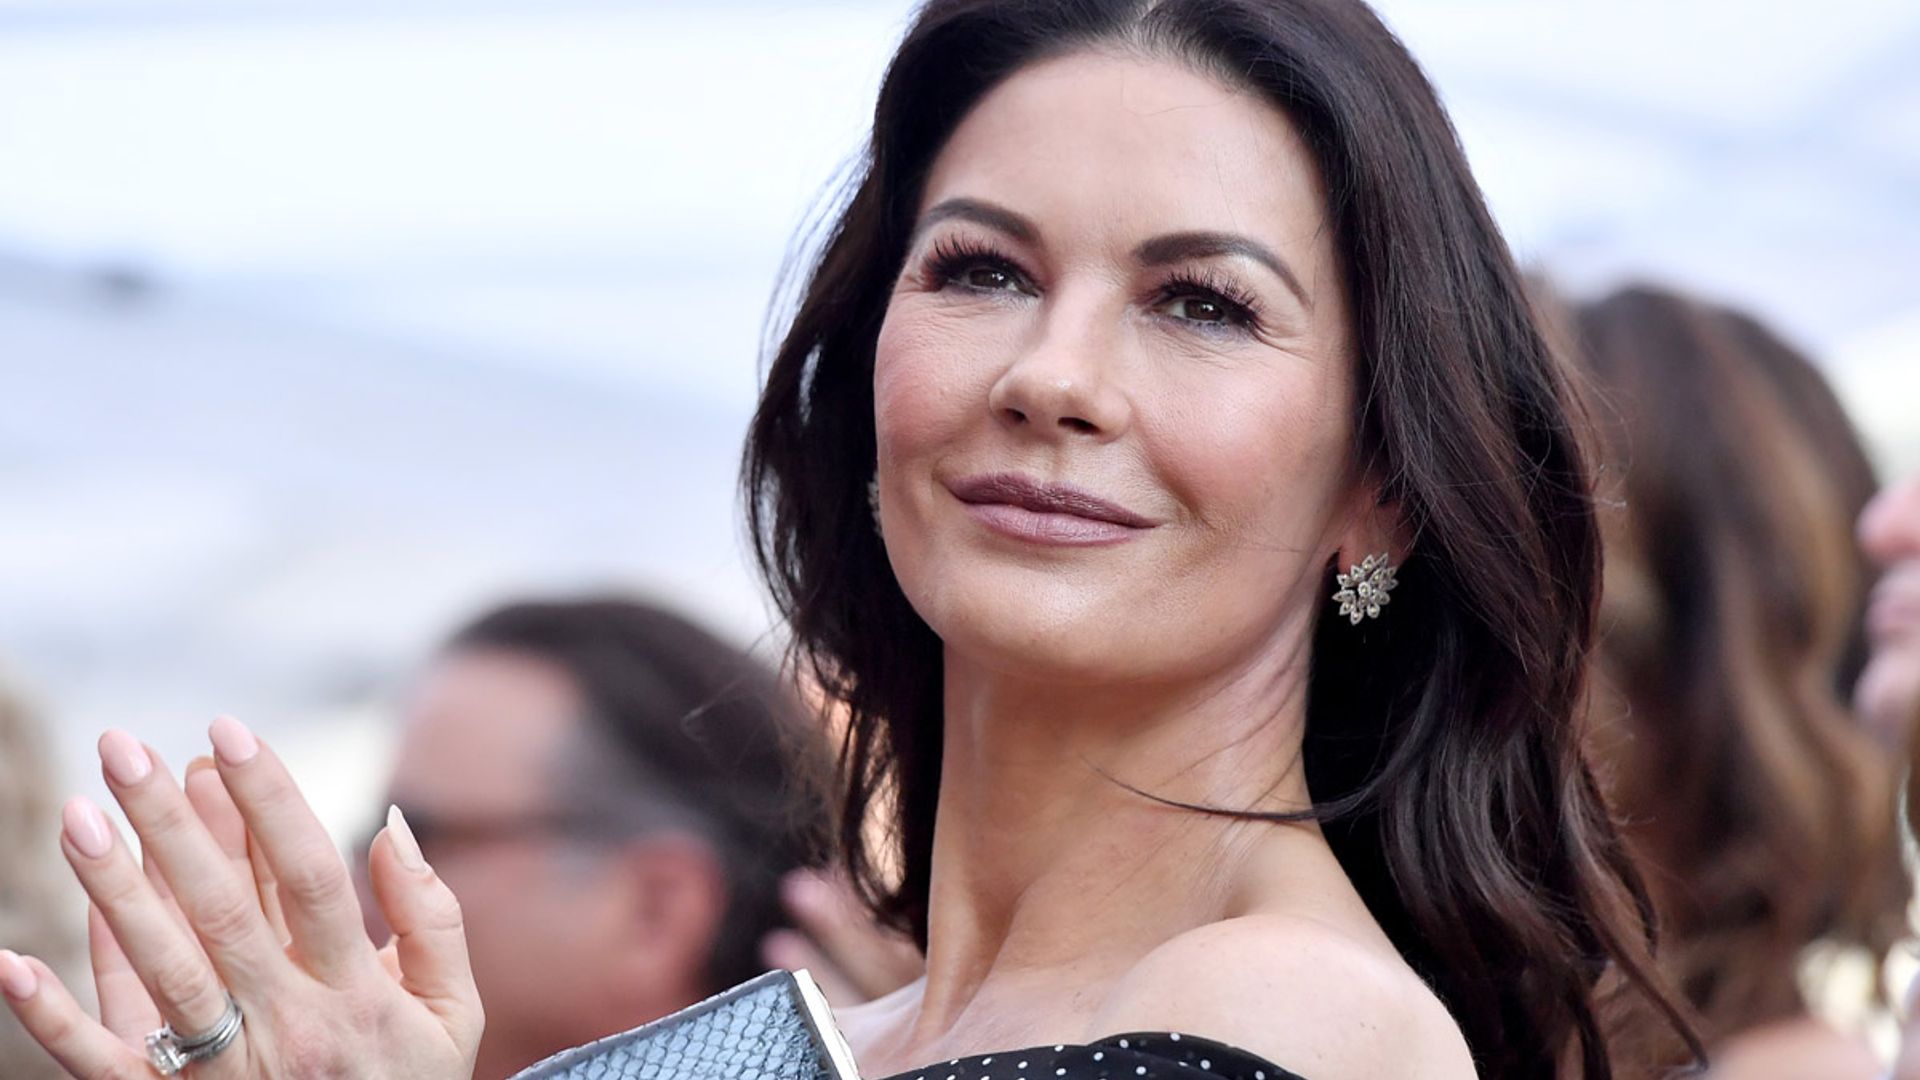 Catherine Zeta-Jones' £ 335k engagement ring was inspired by royal sca...